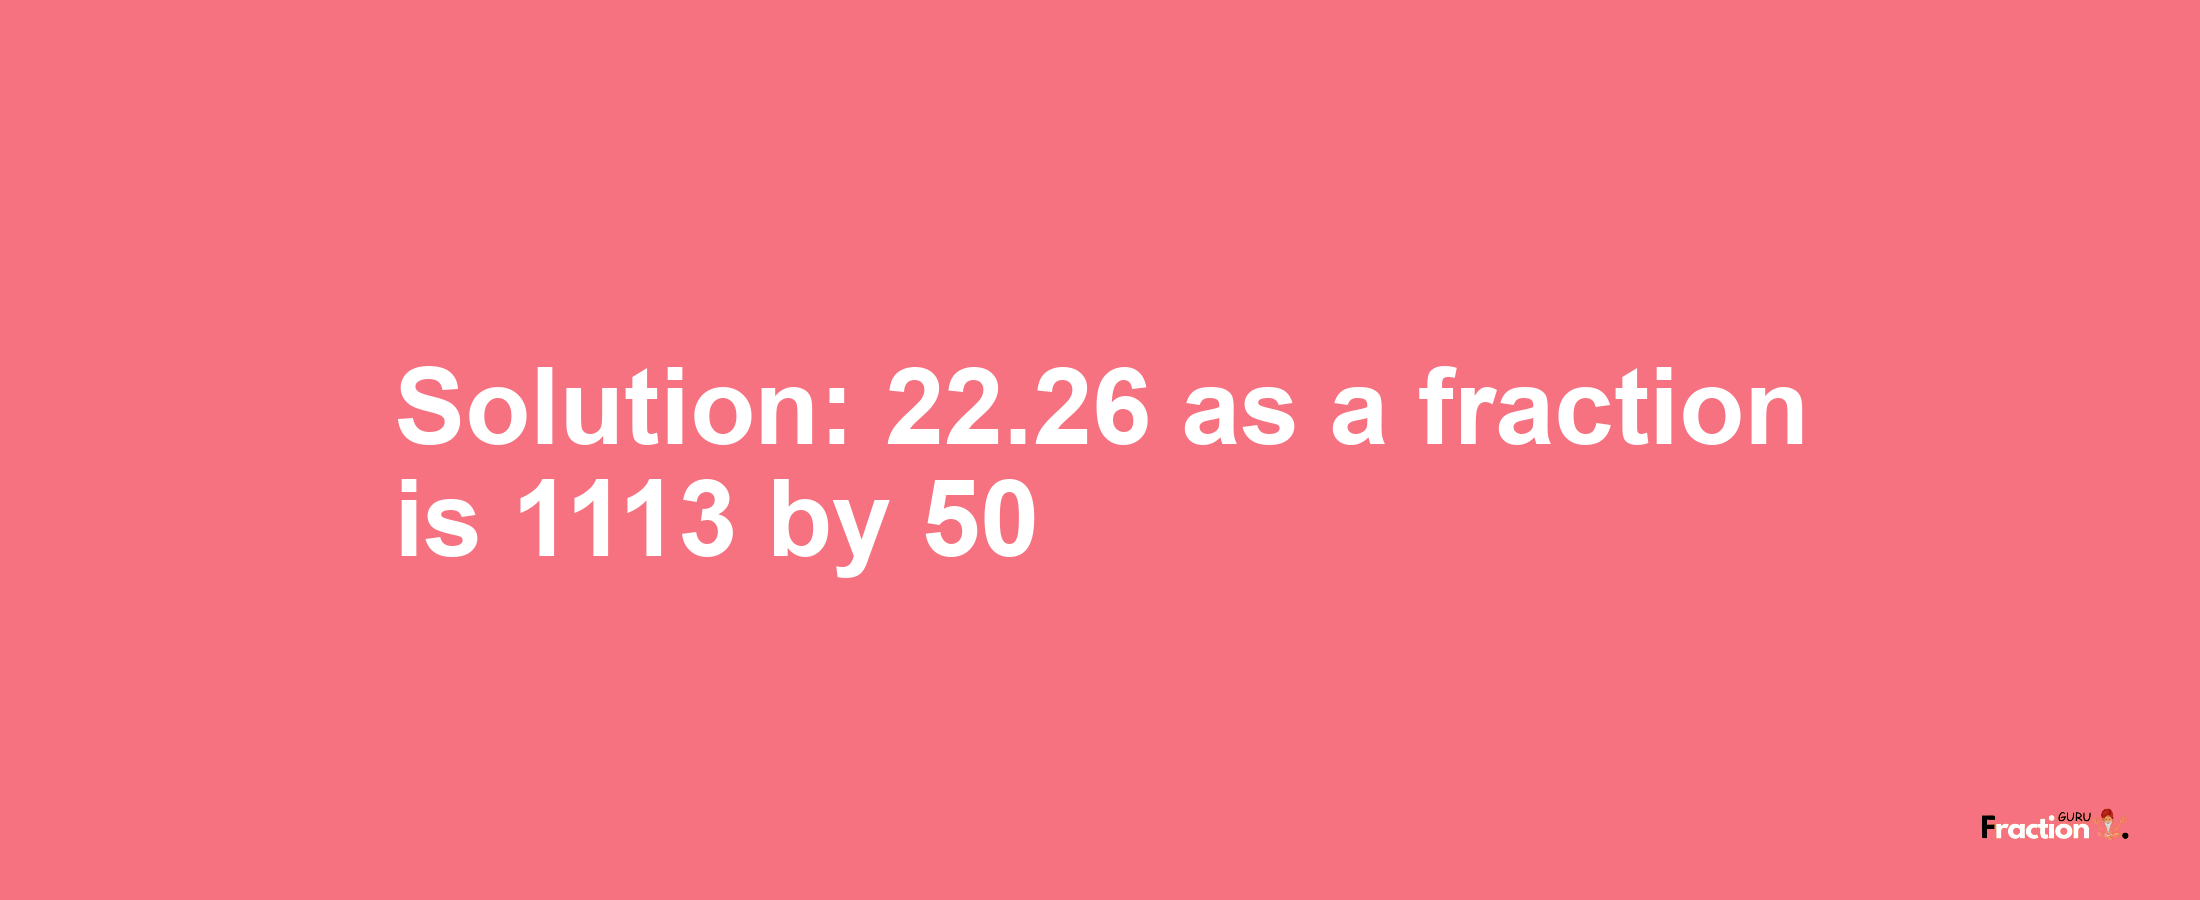 Solution:22.26 as a fraction is 1113/50